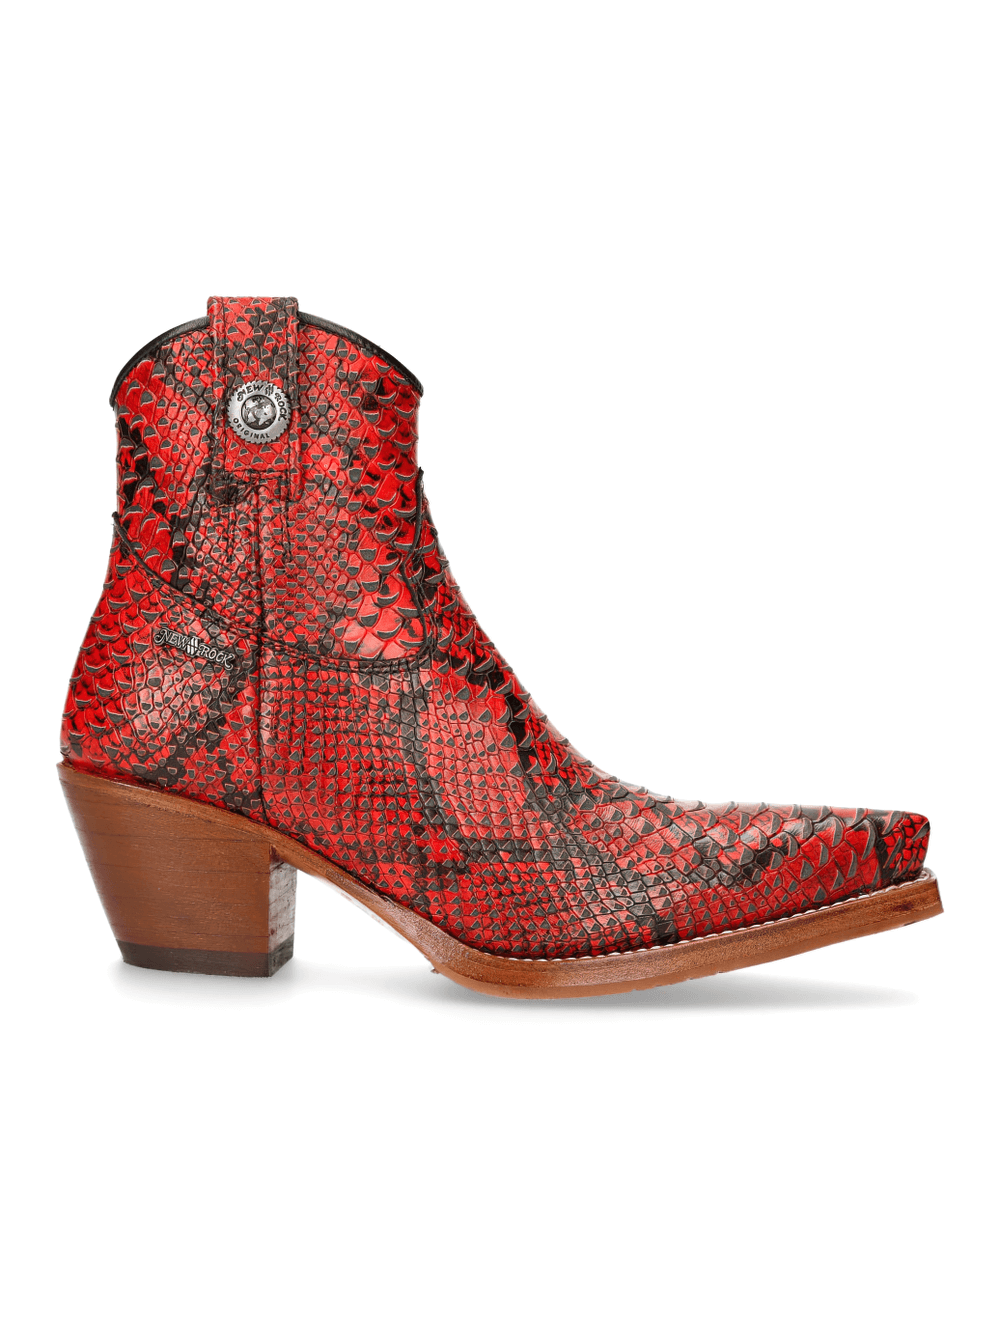 NEW ROCK Red Snake Print Ankle Boots with Zipper Detail